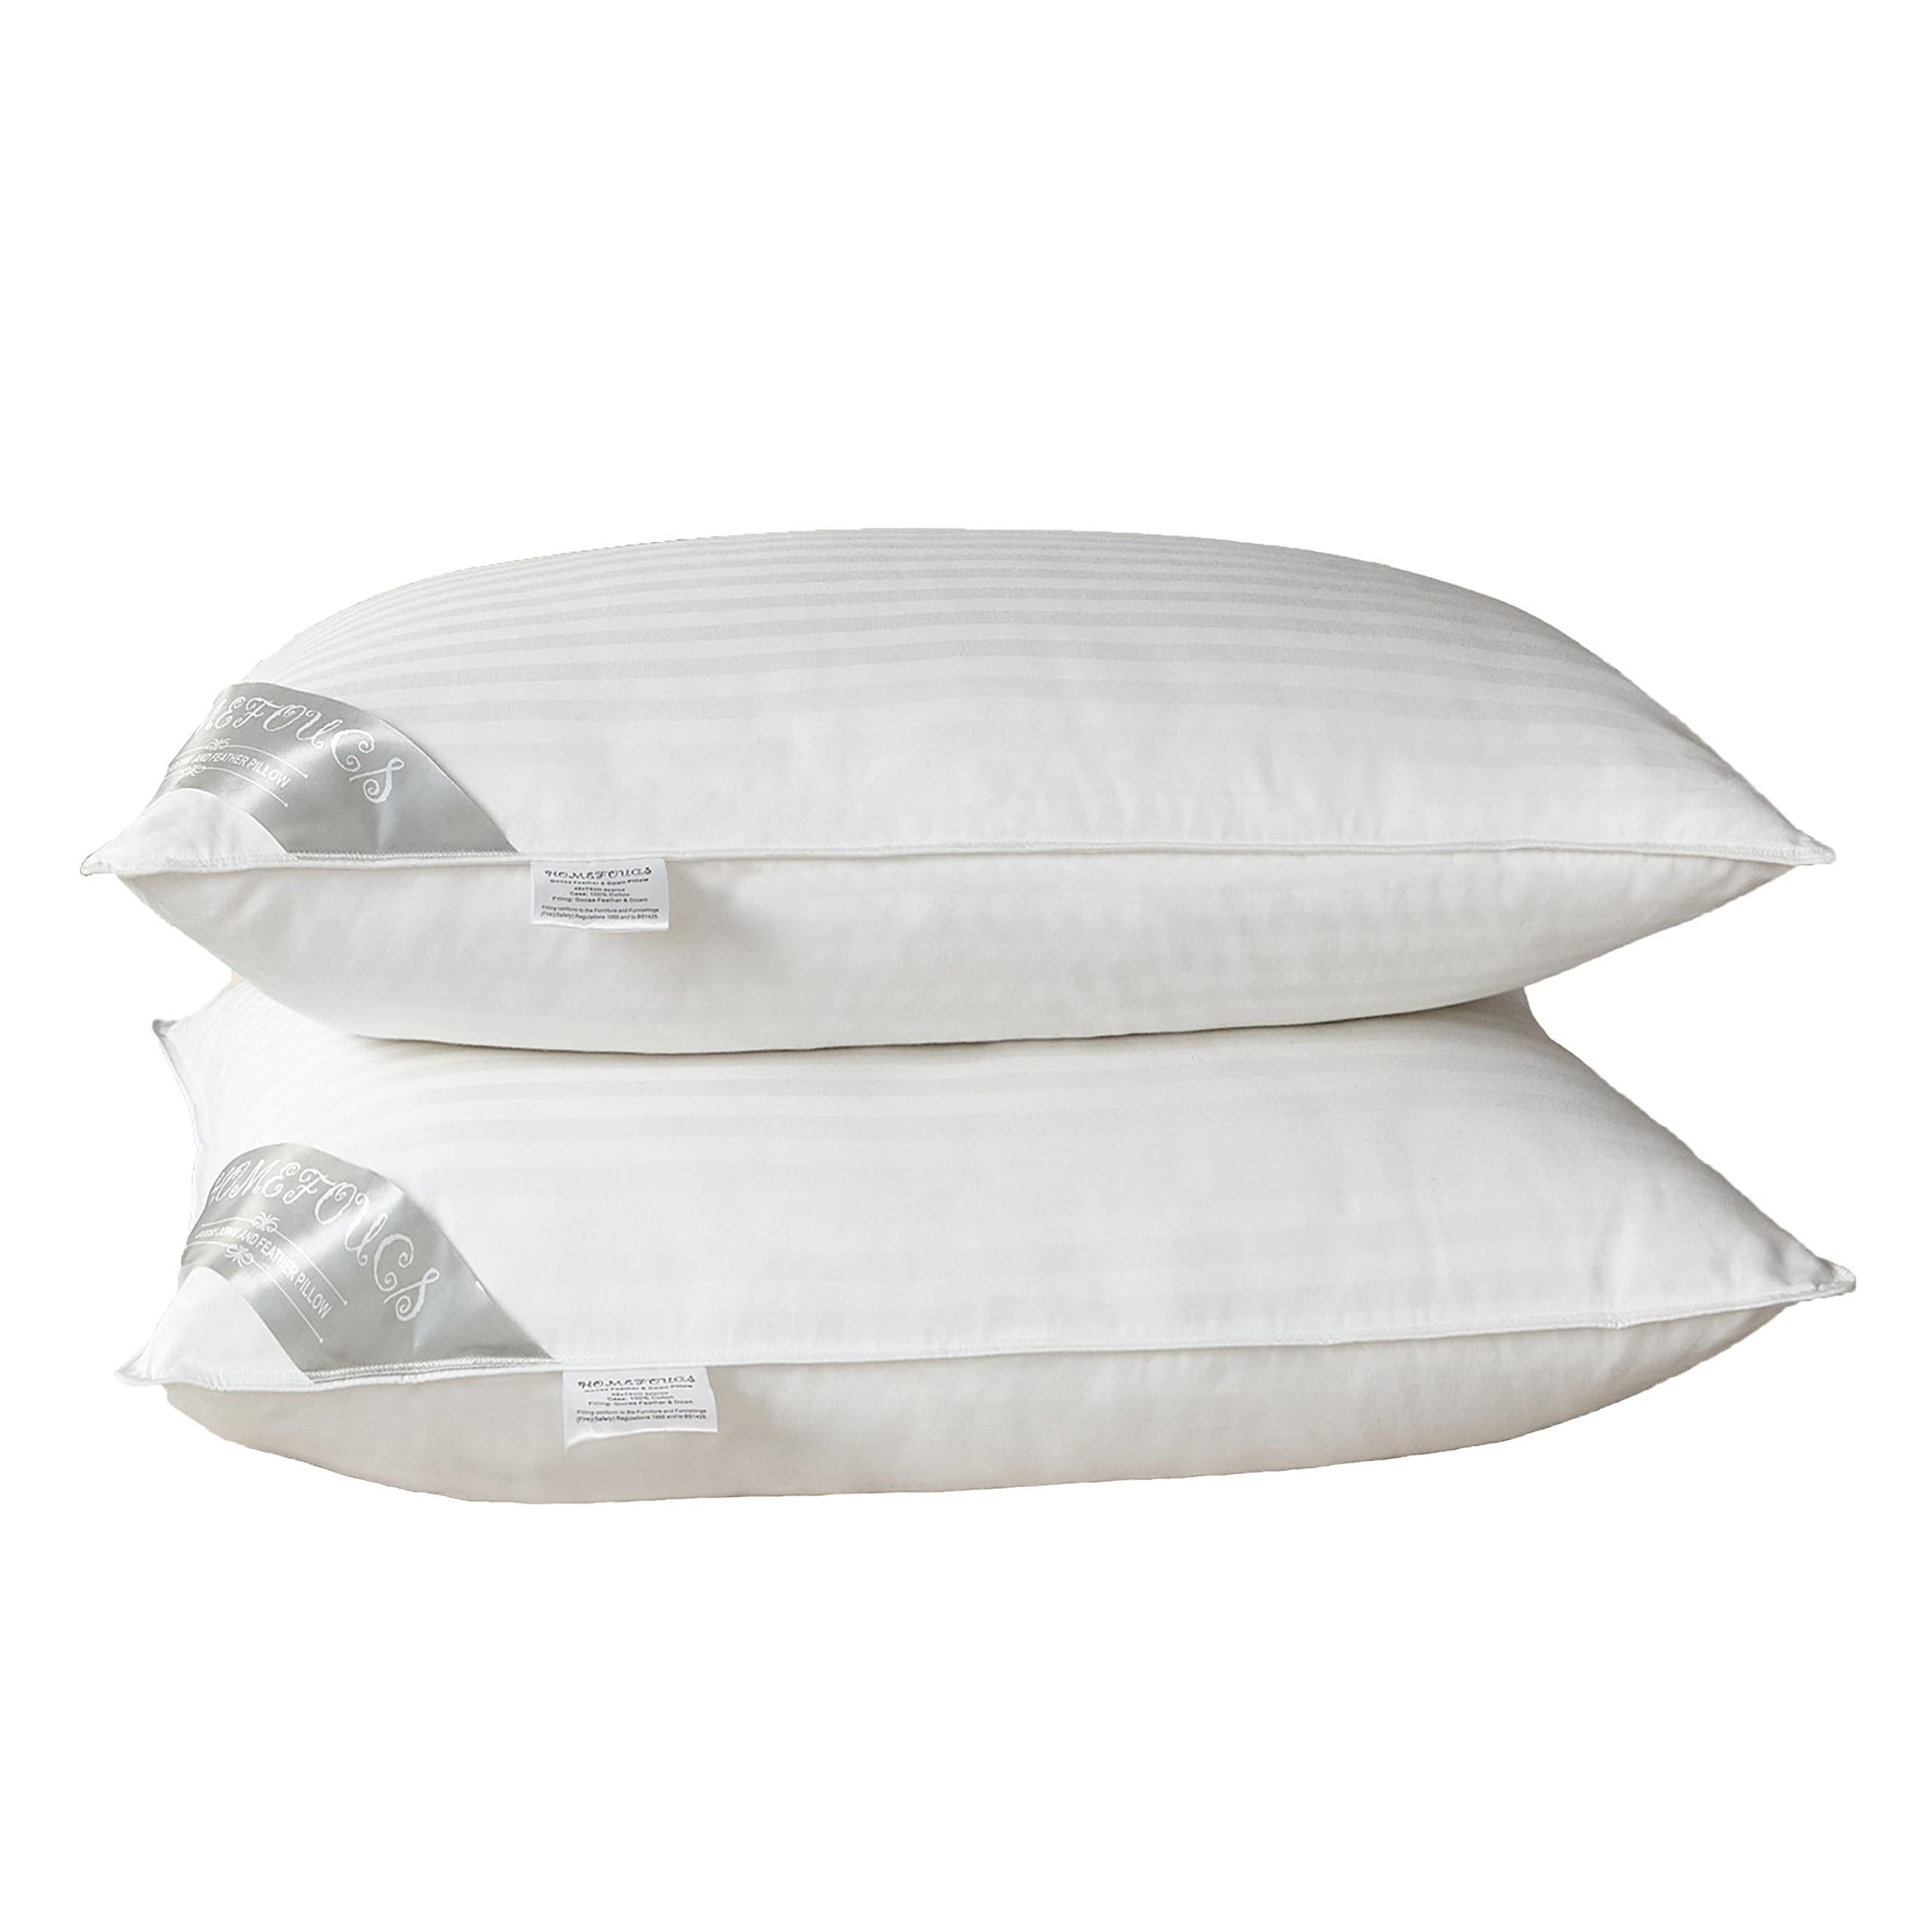 Luxury Goose Feather and Down Pillows, pack of 2 100% Cotton Shell, Non-allergenic & Anti dust mite, Soft Hotel Quality Pillows (40% Down)